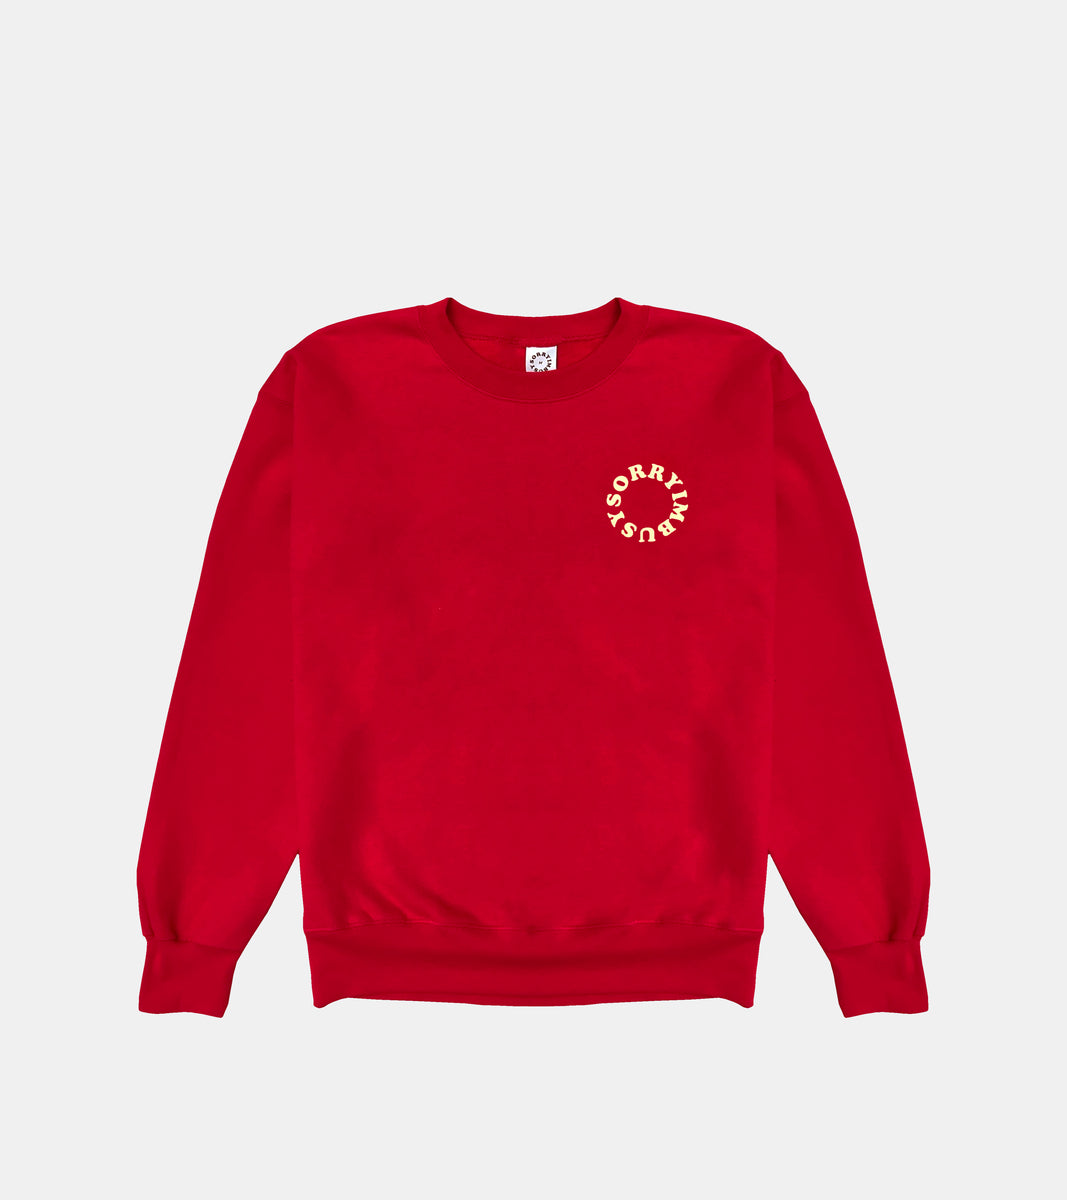 BUSY-NESS Crewneck - Red